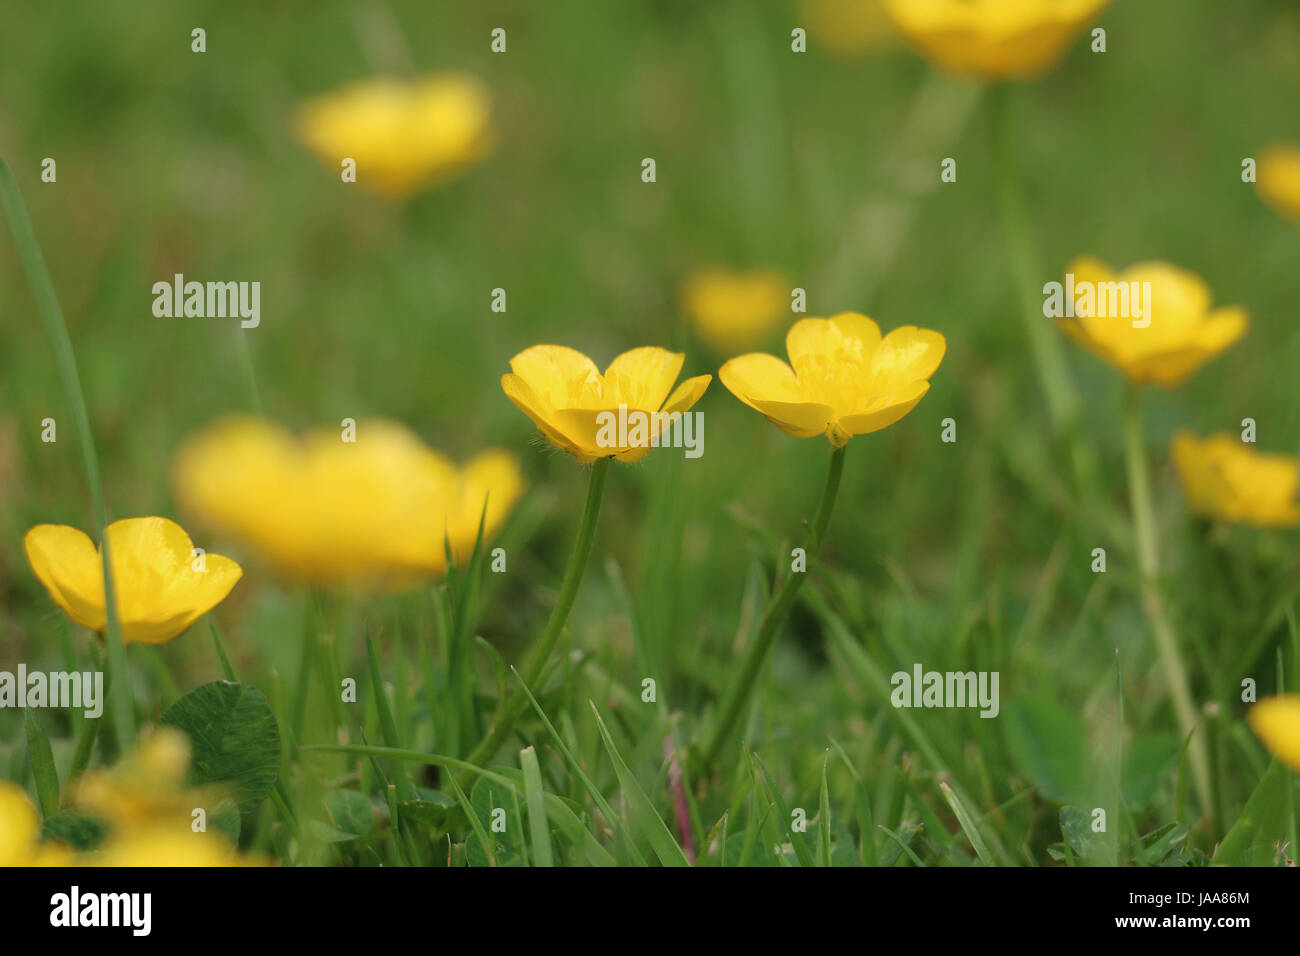 Yellow Creeping Buttercup Flowers, Ranunculus repens, shimmering in the summer sun on natural green grass background. Stock Photo